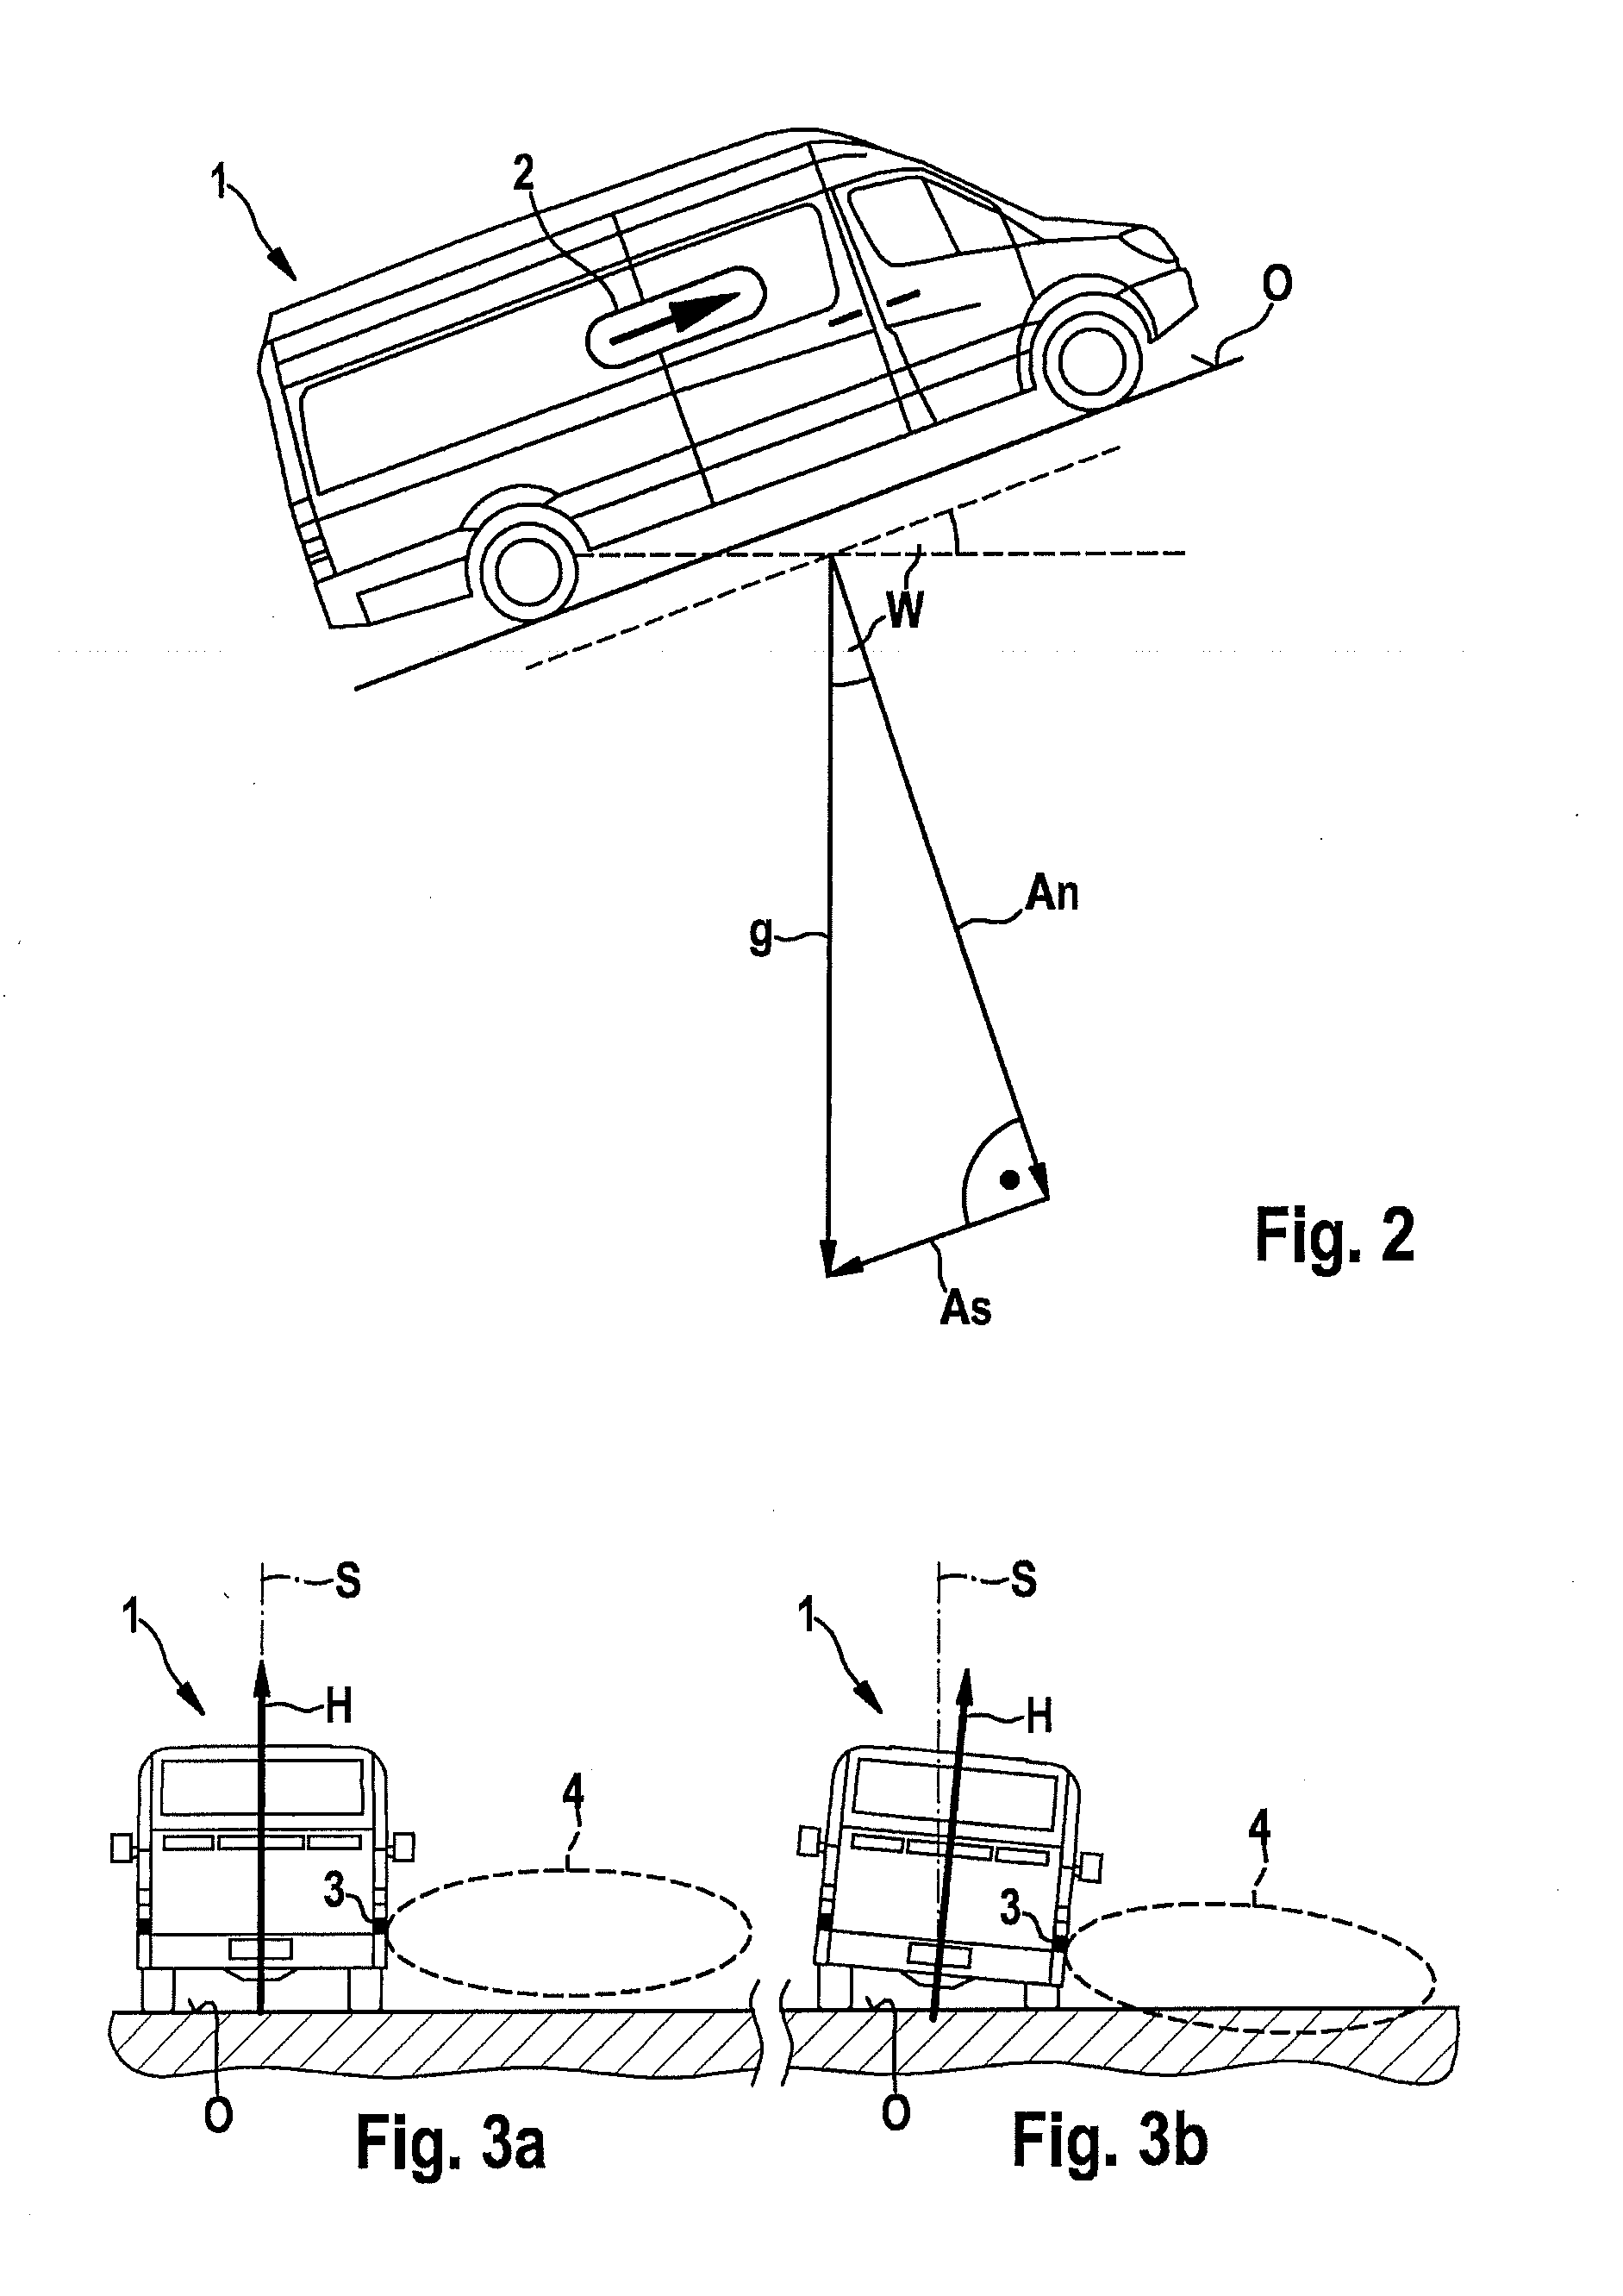 Method and devices for detecting and rectifying problems in connection with a vehicle load